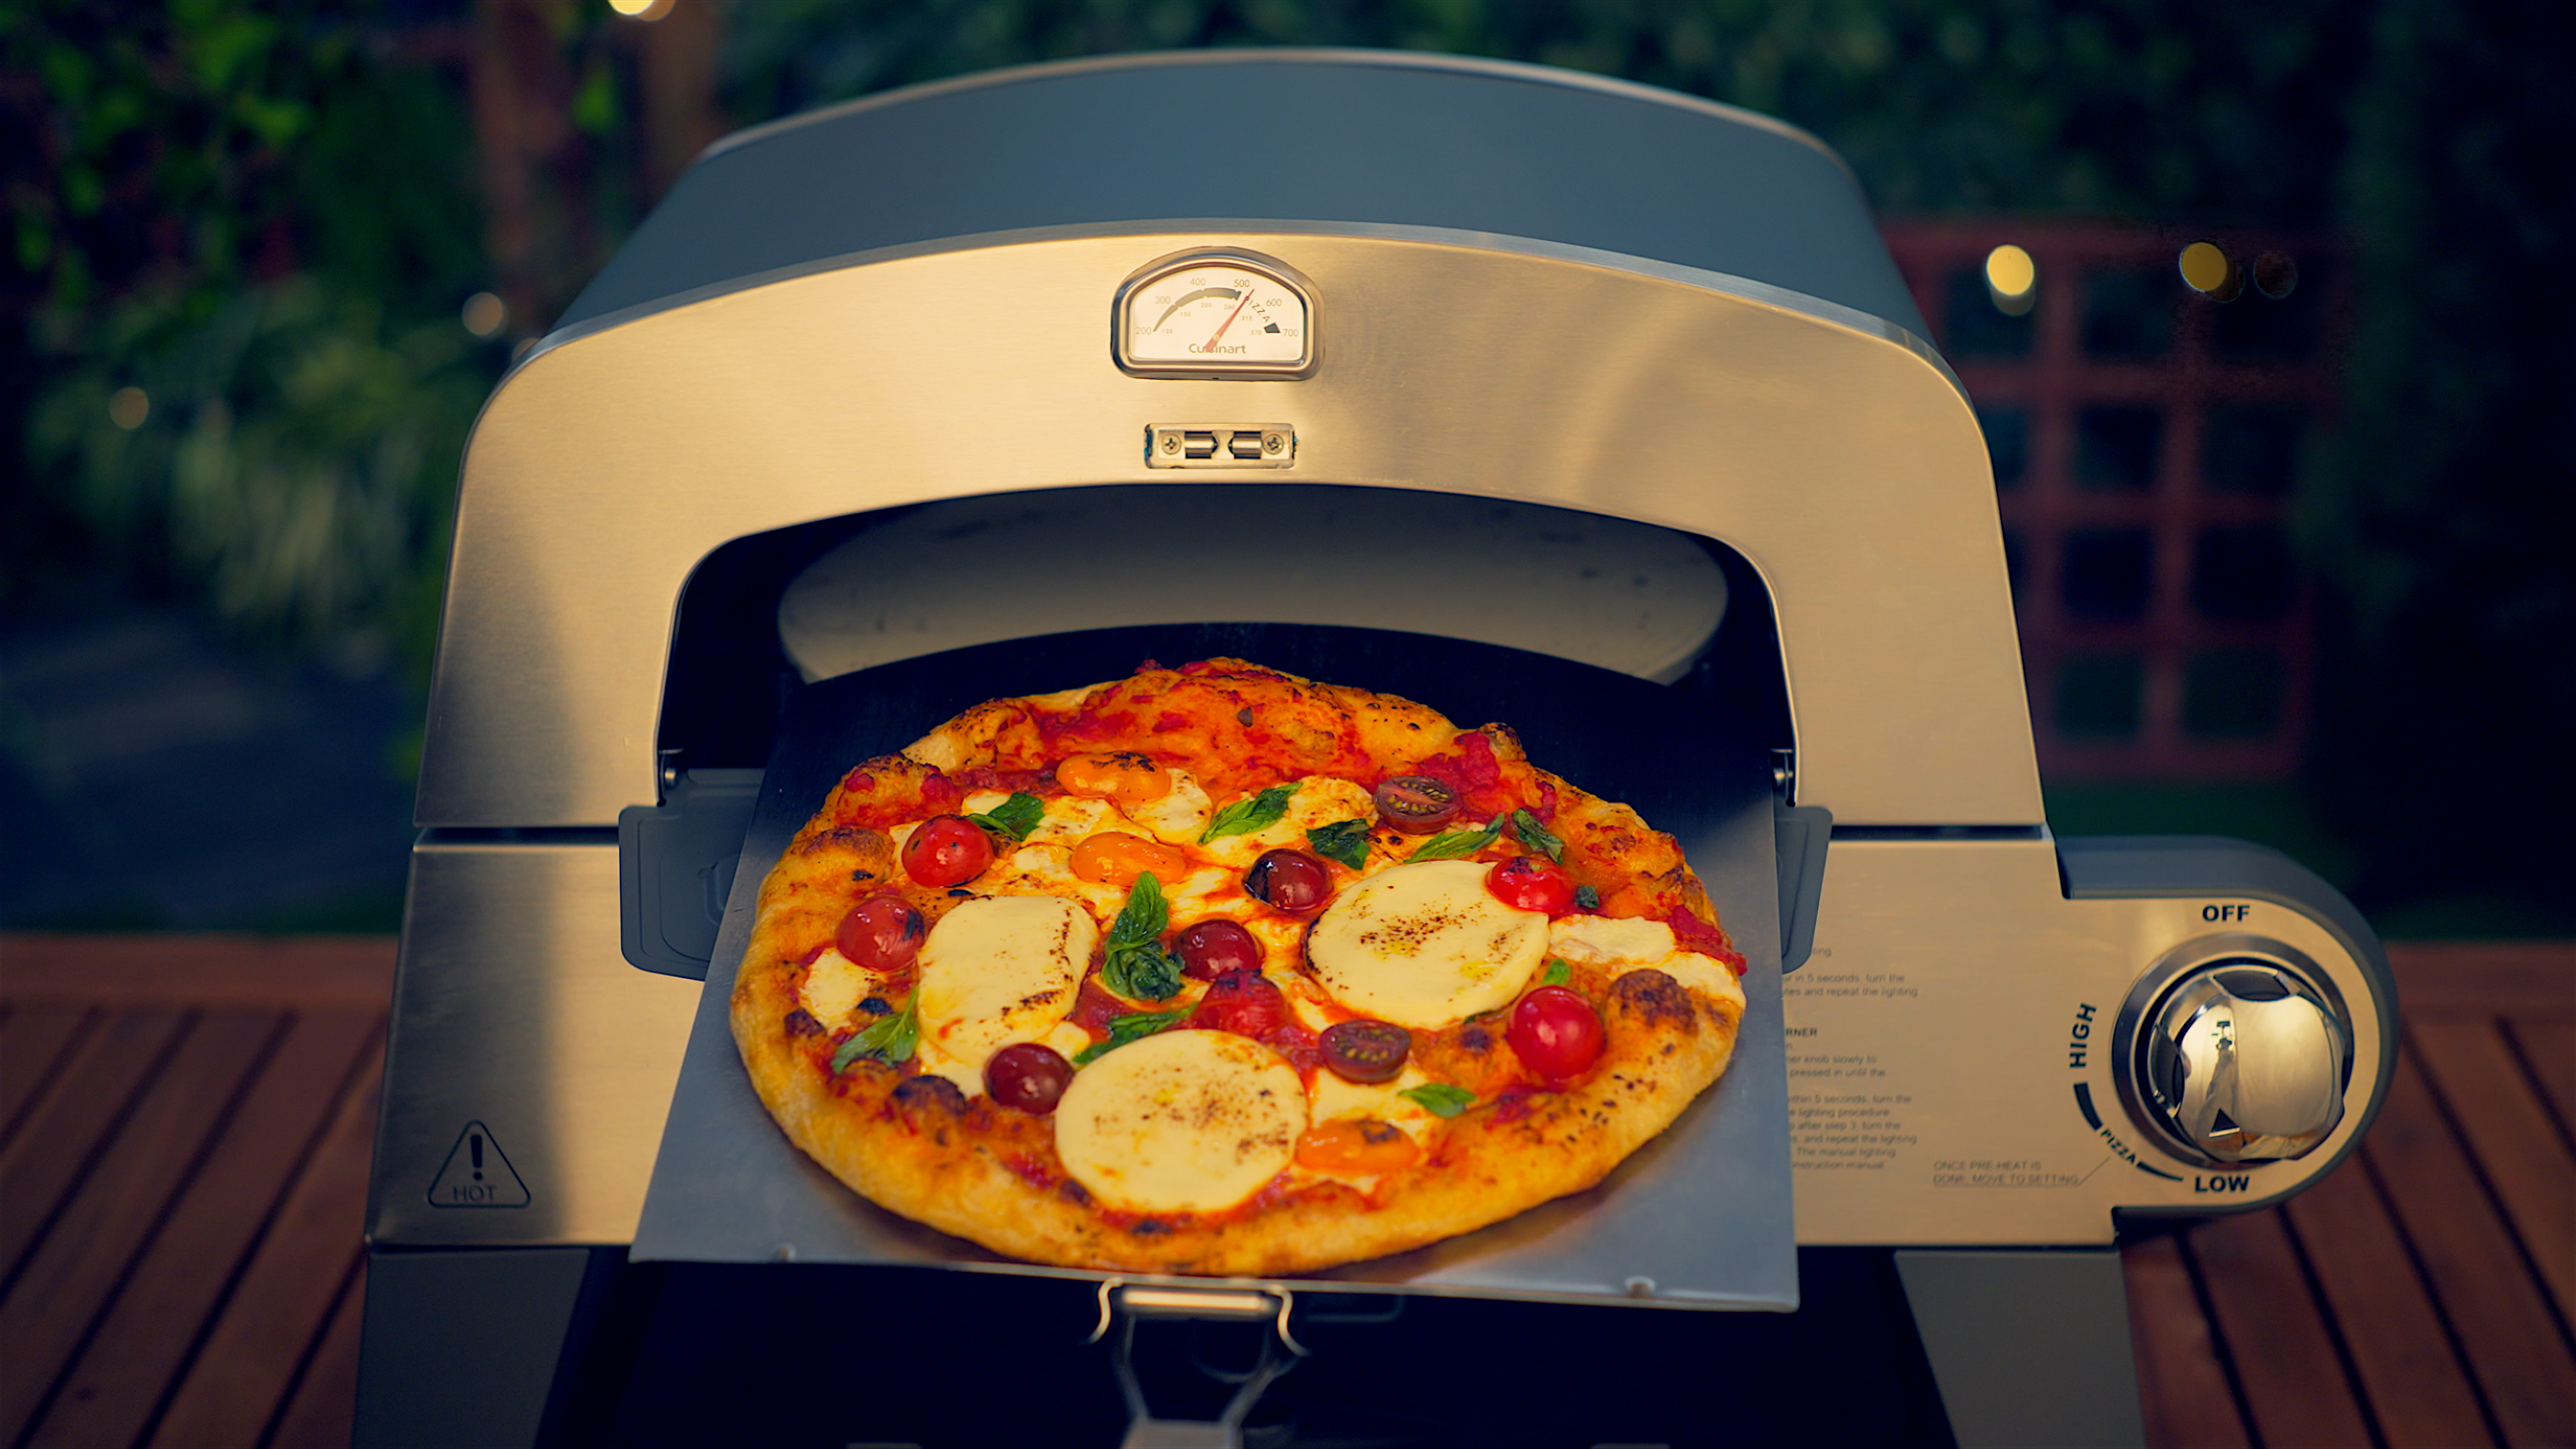 Cuisinart 3-in-1 Pizza Oven, Griddle, and Grill - image 4 of 11